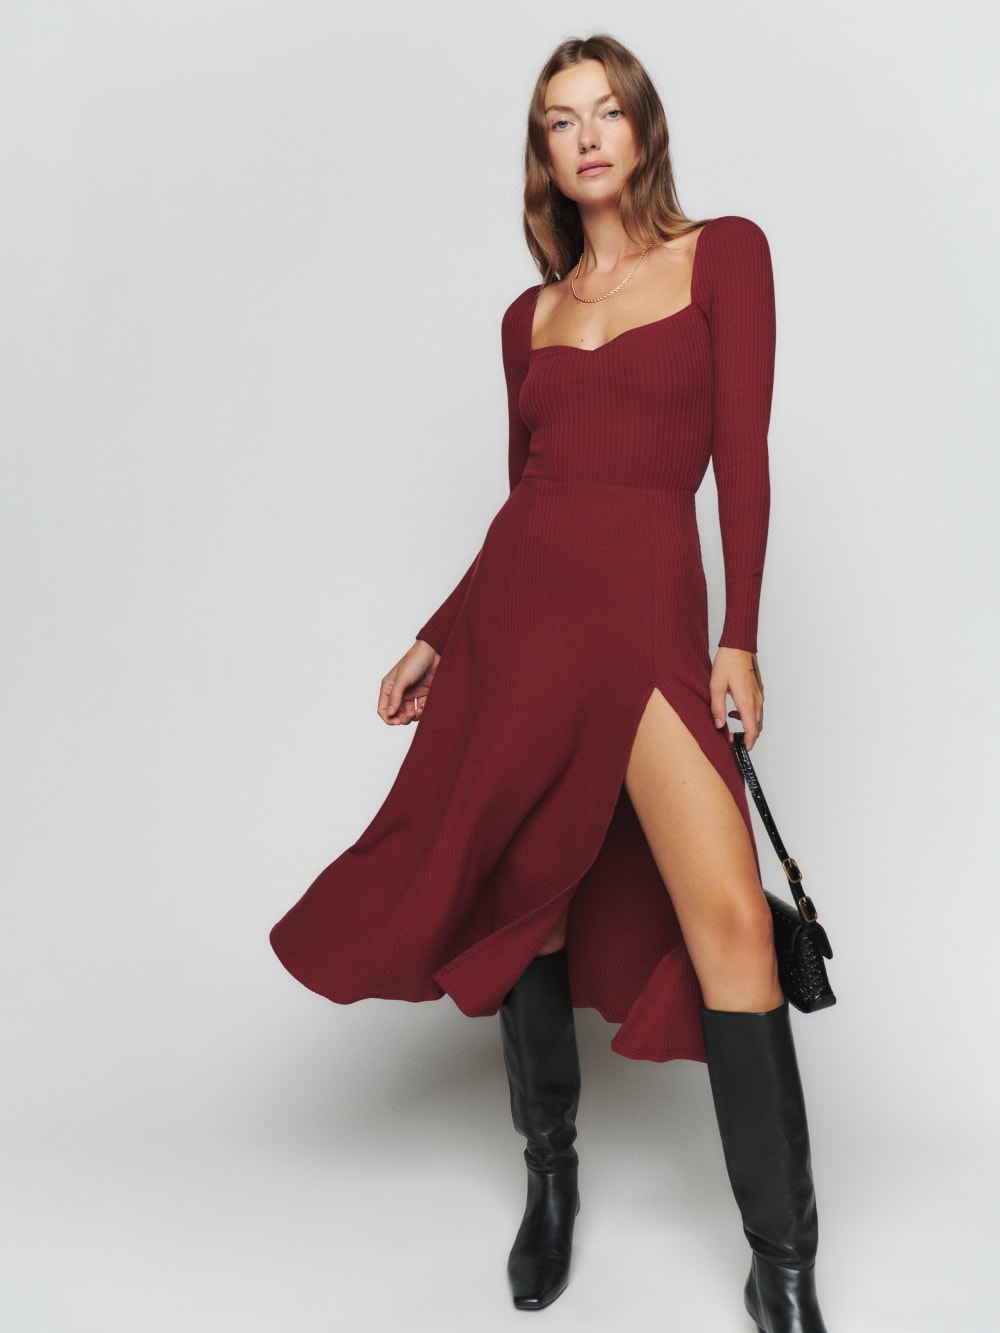 Reformation burgundy Banks knit dress has a Sweetheart neckline, fitted waist, long sleeves, and side slit. It comes in a Cotton Sweater Rib is a medium weight. 